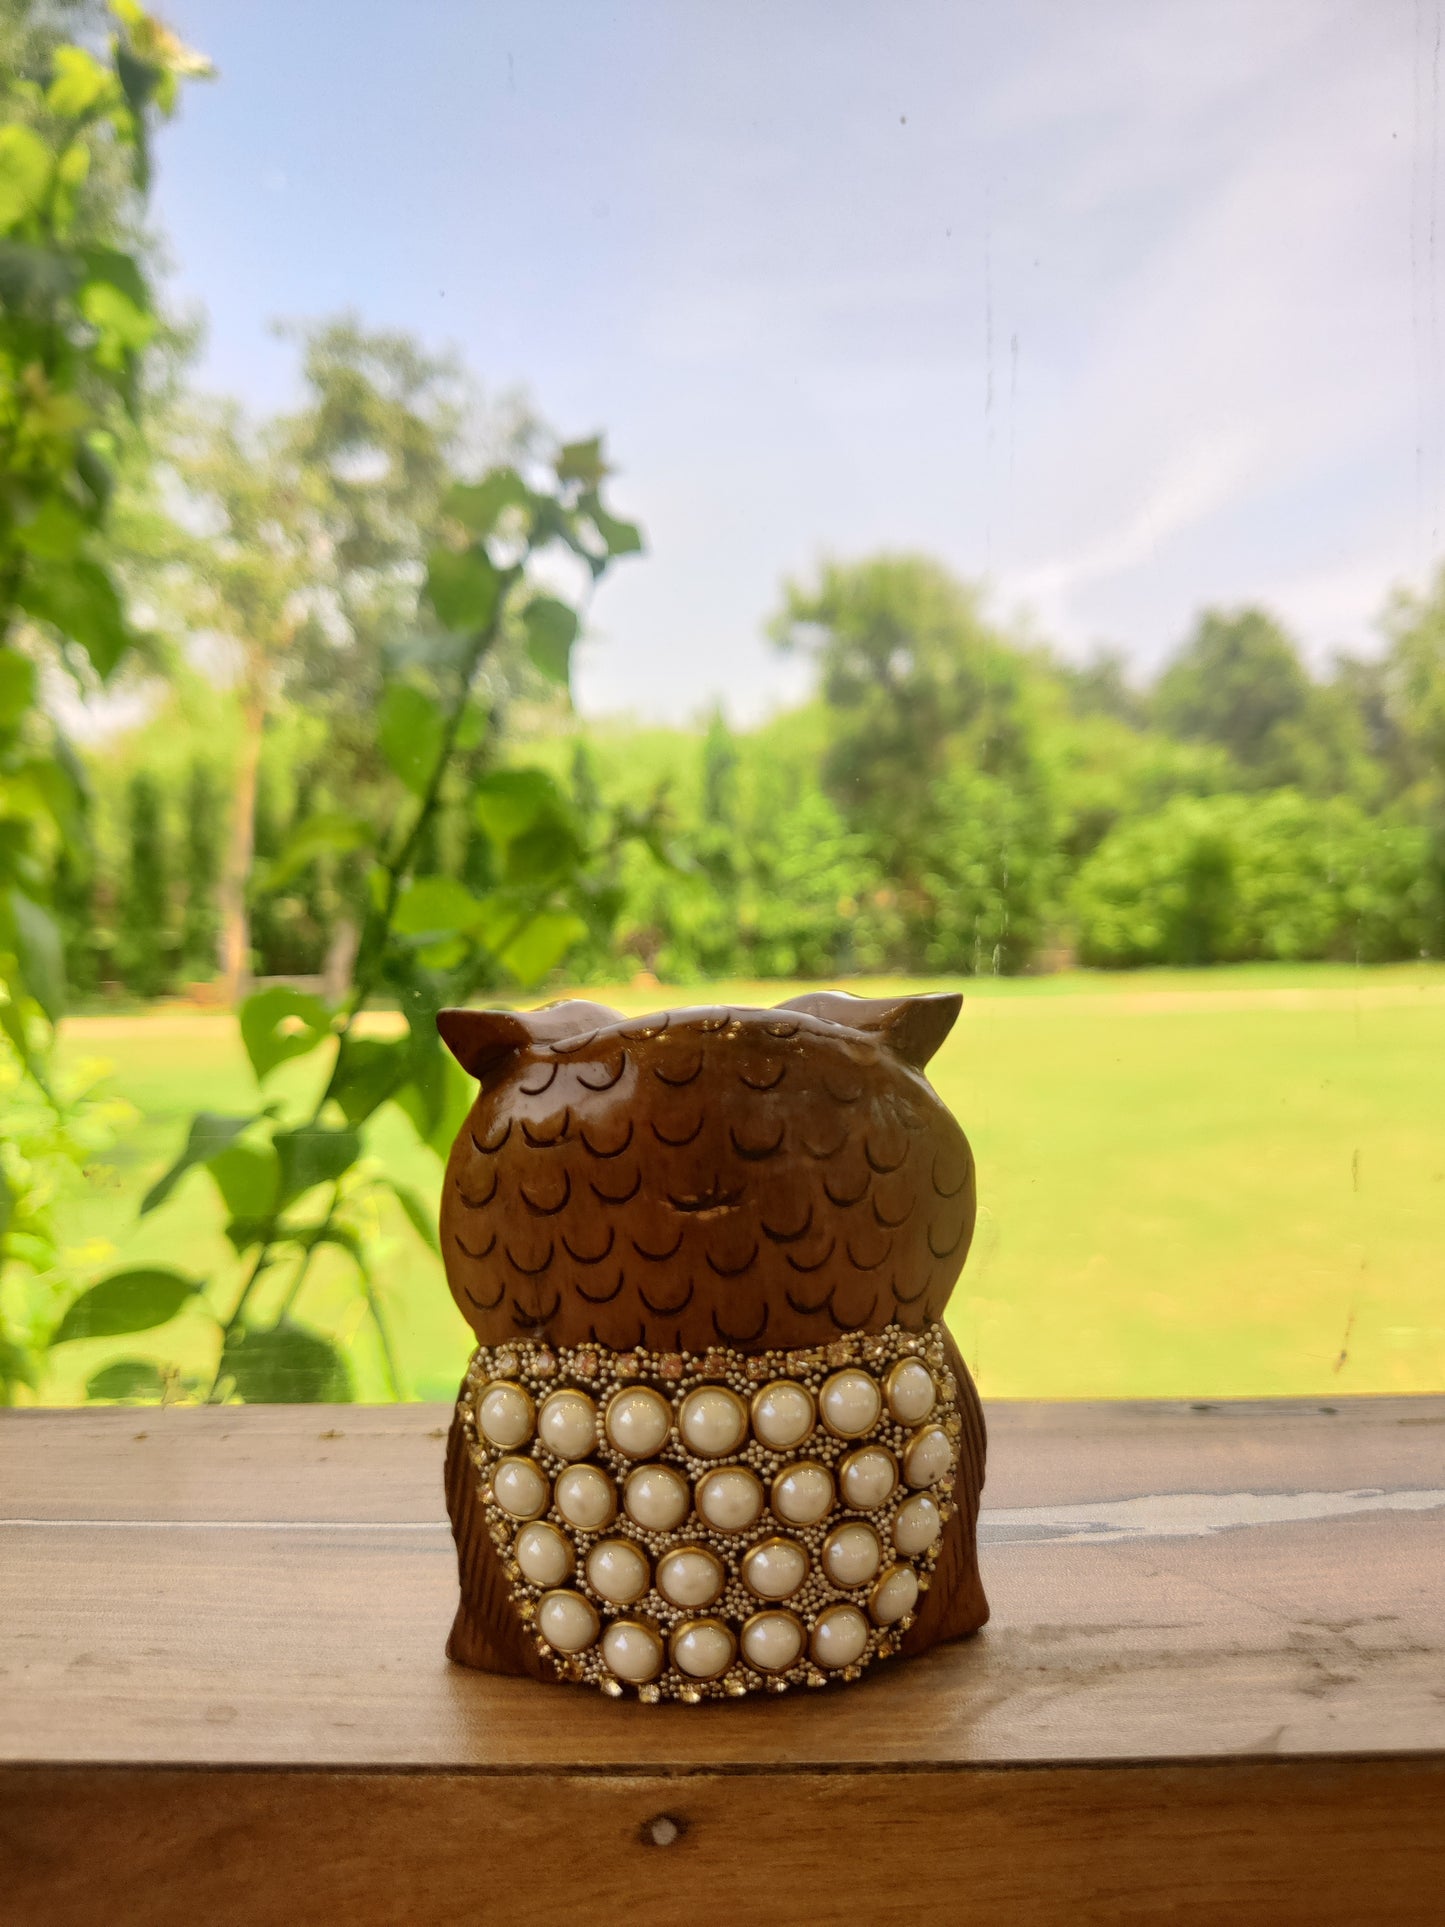 Wooden owl with Pearl work